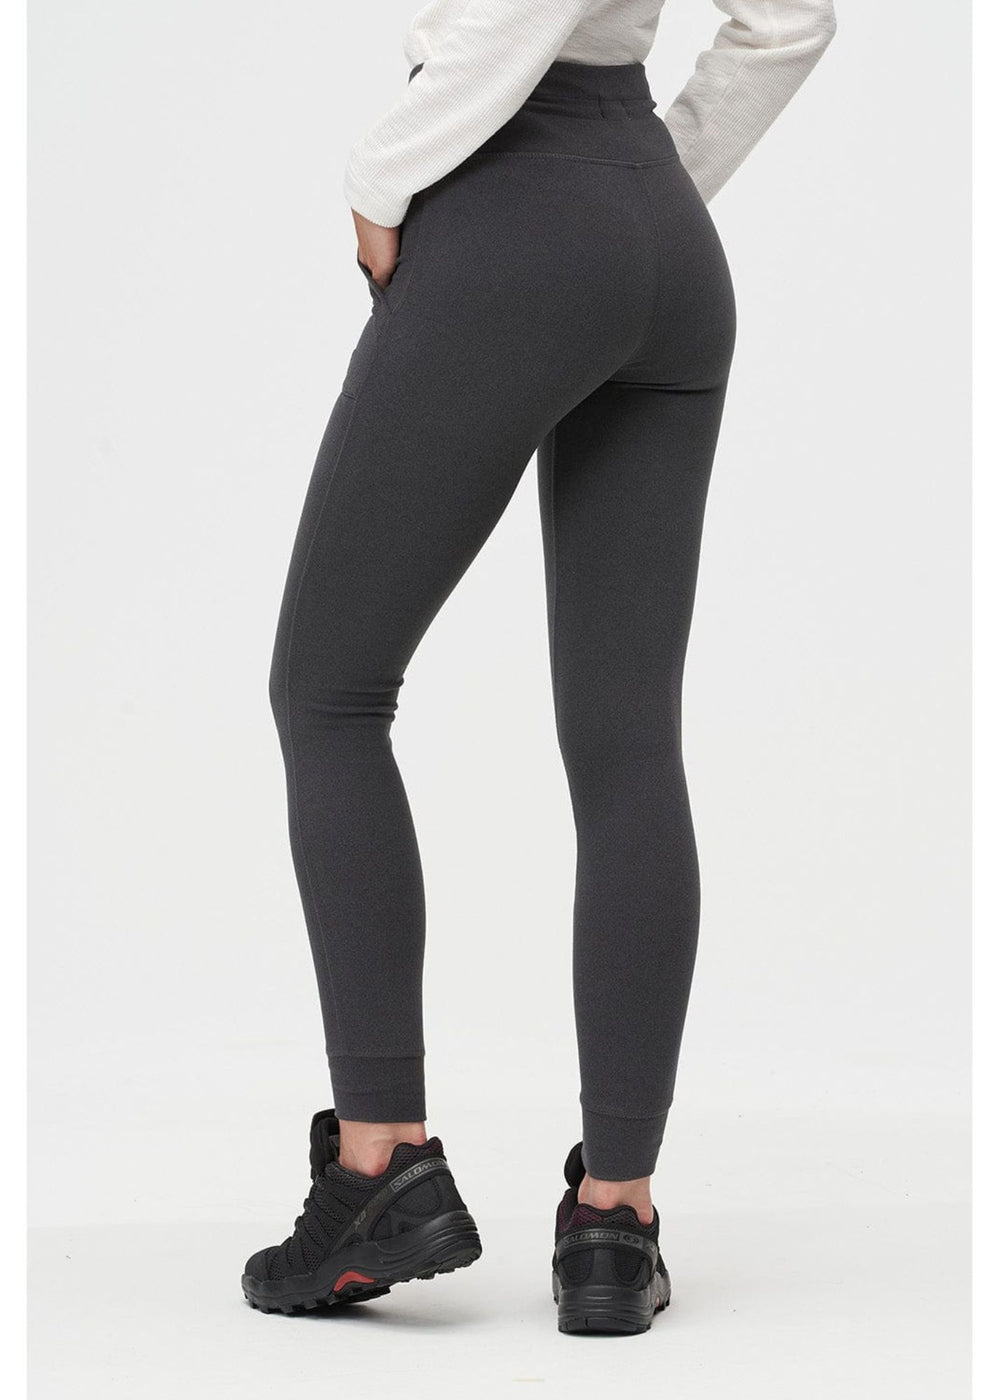 Simply Vera Vera Wang Nita Plum Live-In Shaping High Rise Leggings - Size  2X NWT : Buy Online in the UAE, Price from 274 EAD & Shipping to Dubai